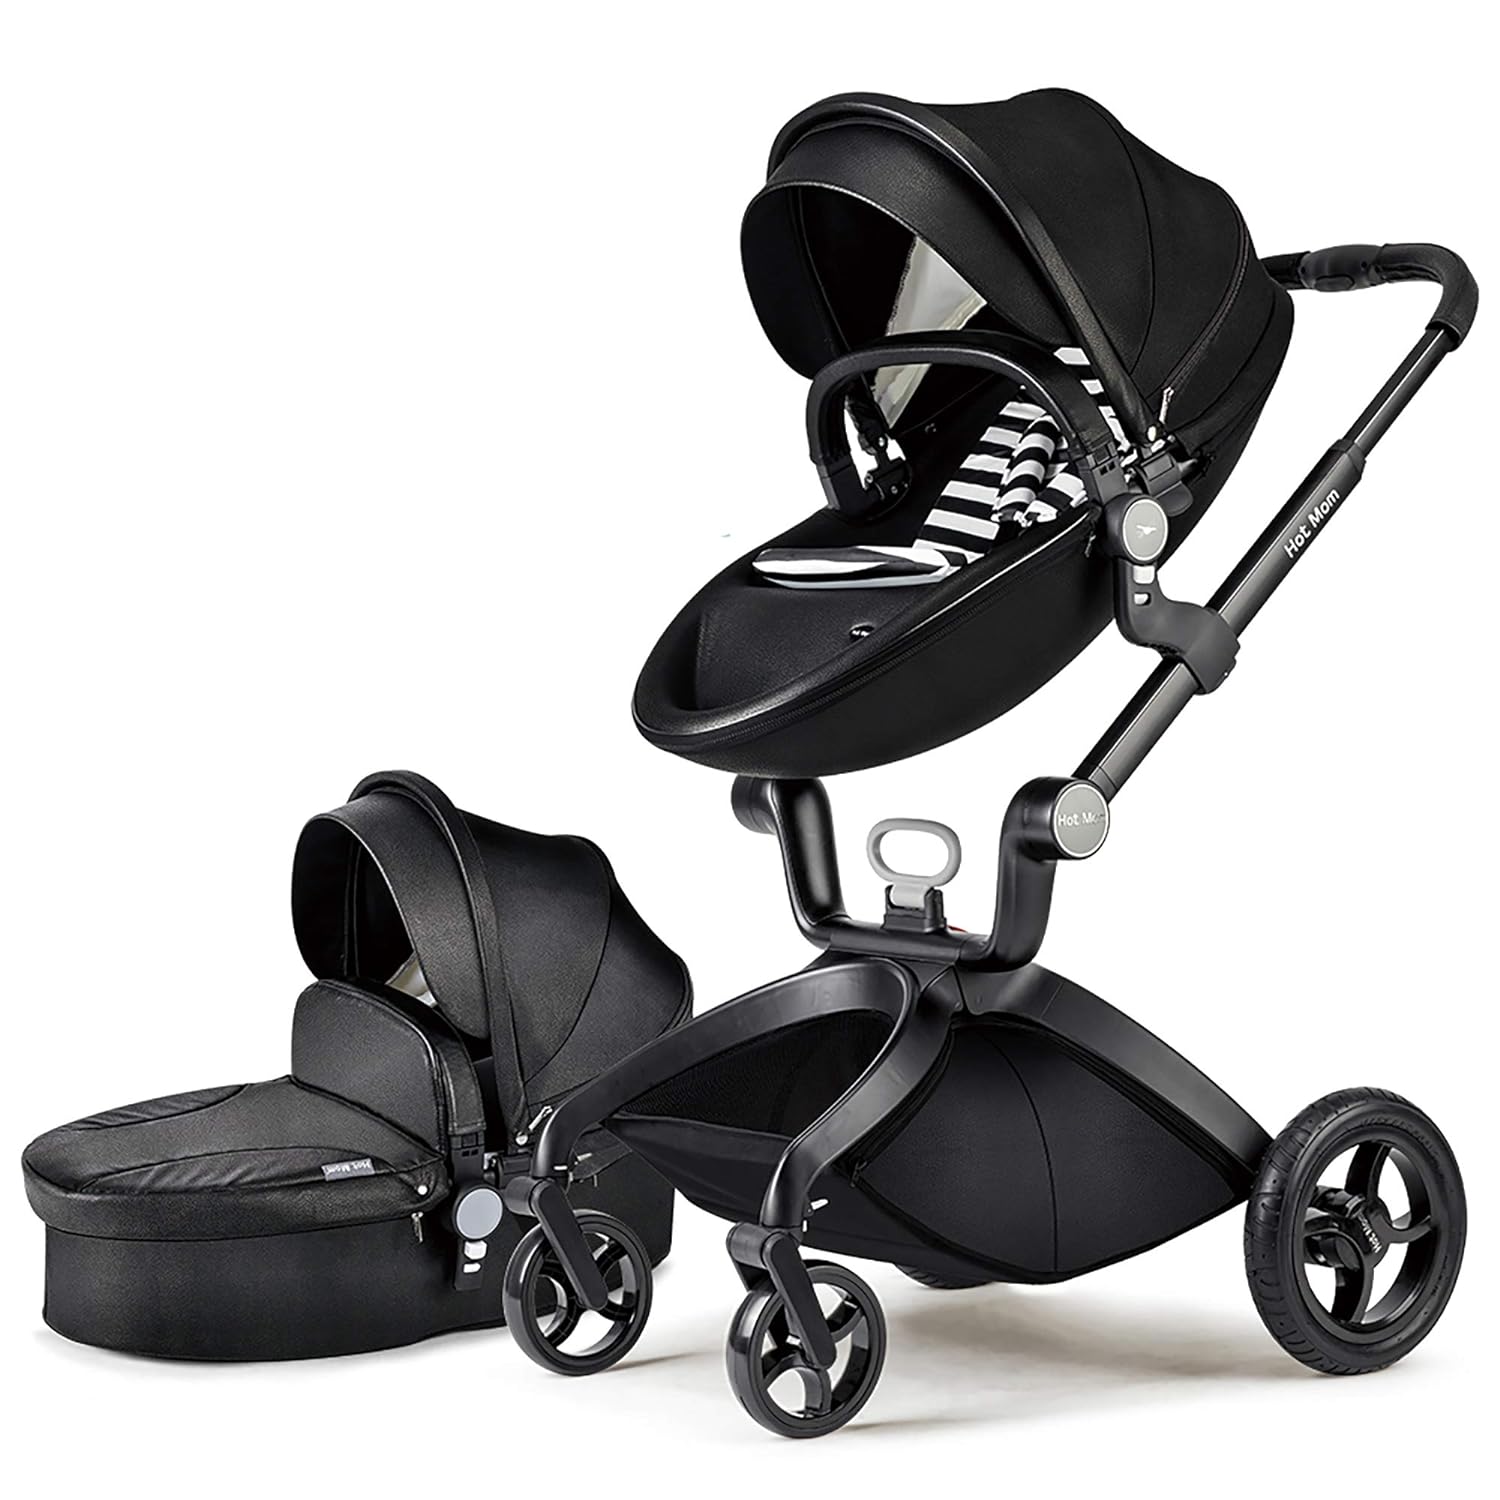 Hot Mom Baby Stroller: Baby Carriage with Adjustable Seat Height Angle and Four-Wheel Shock Absorption,Reversible，High Landscape and Fashional Pram (Grid) - Hot Mom Baby Stroller Review